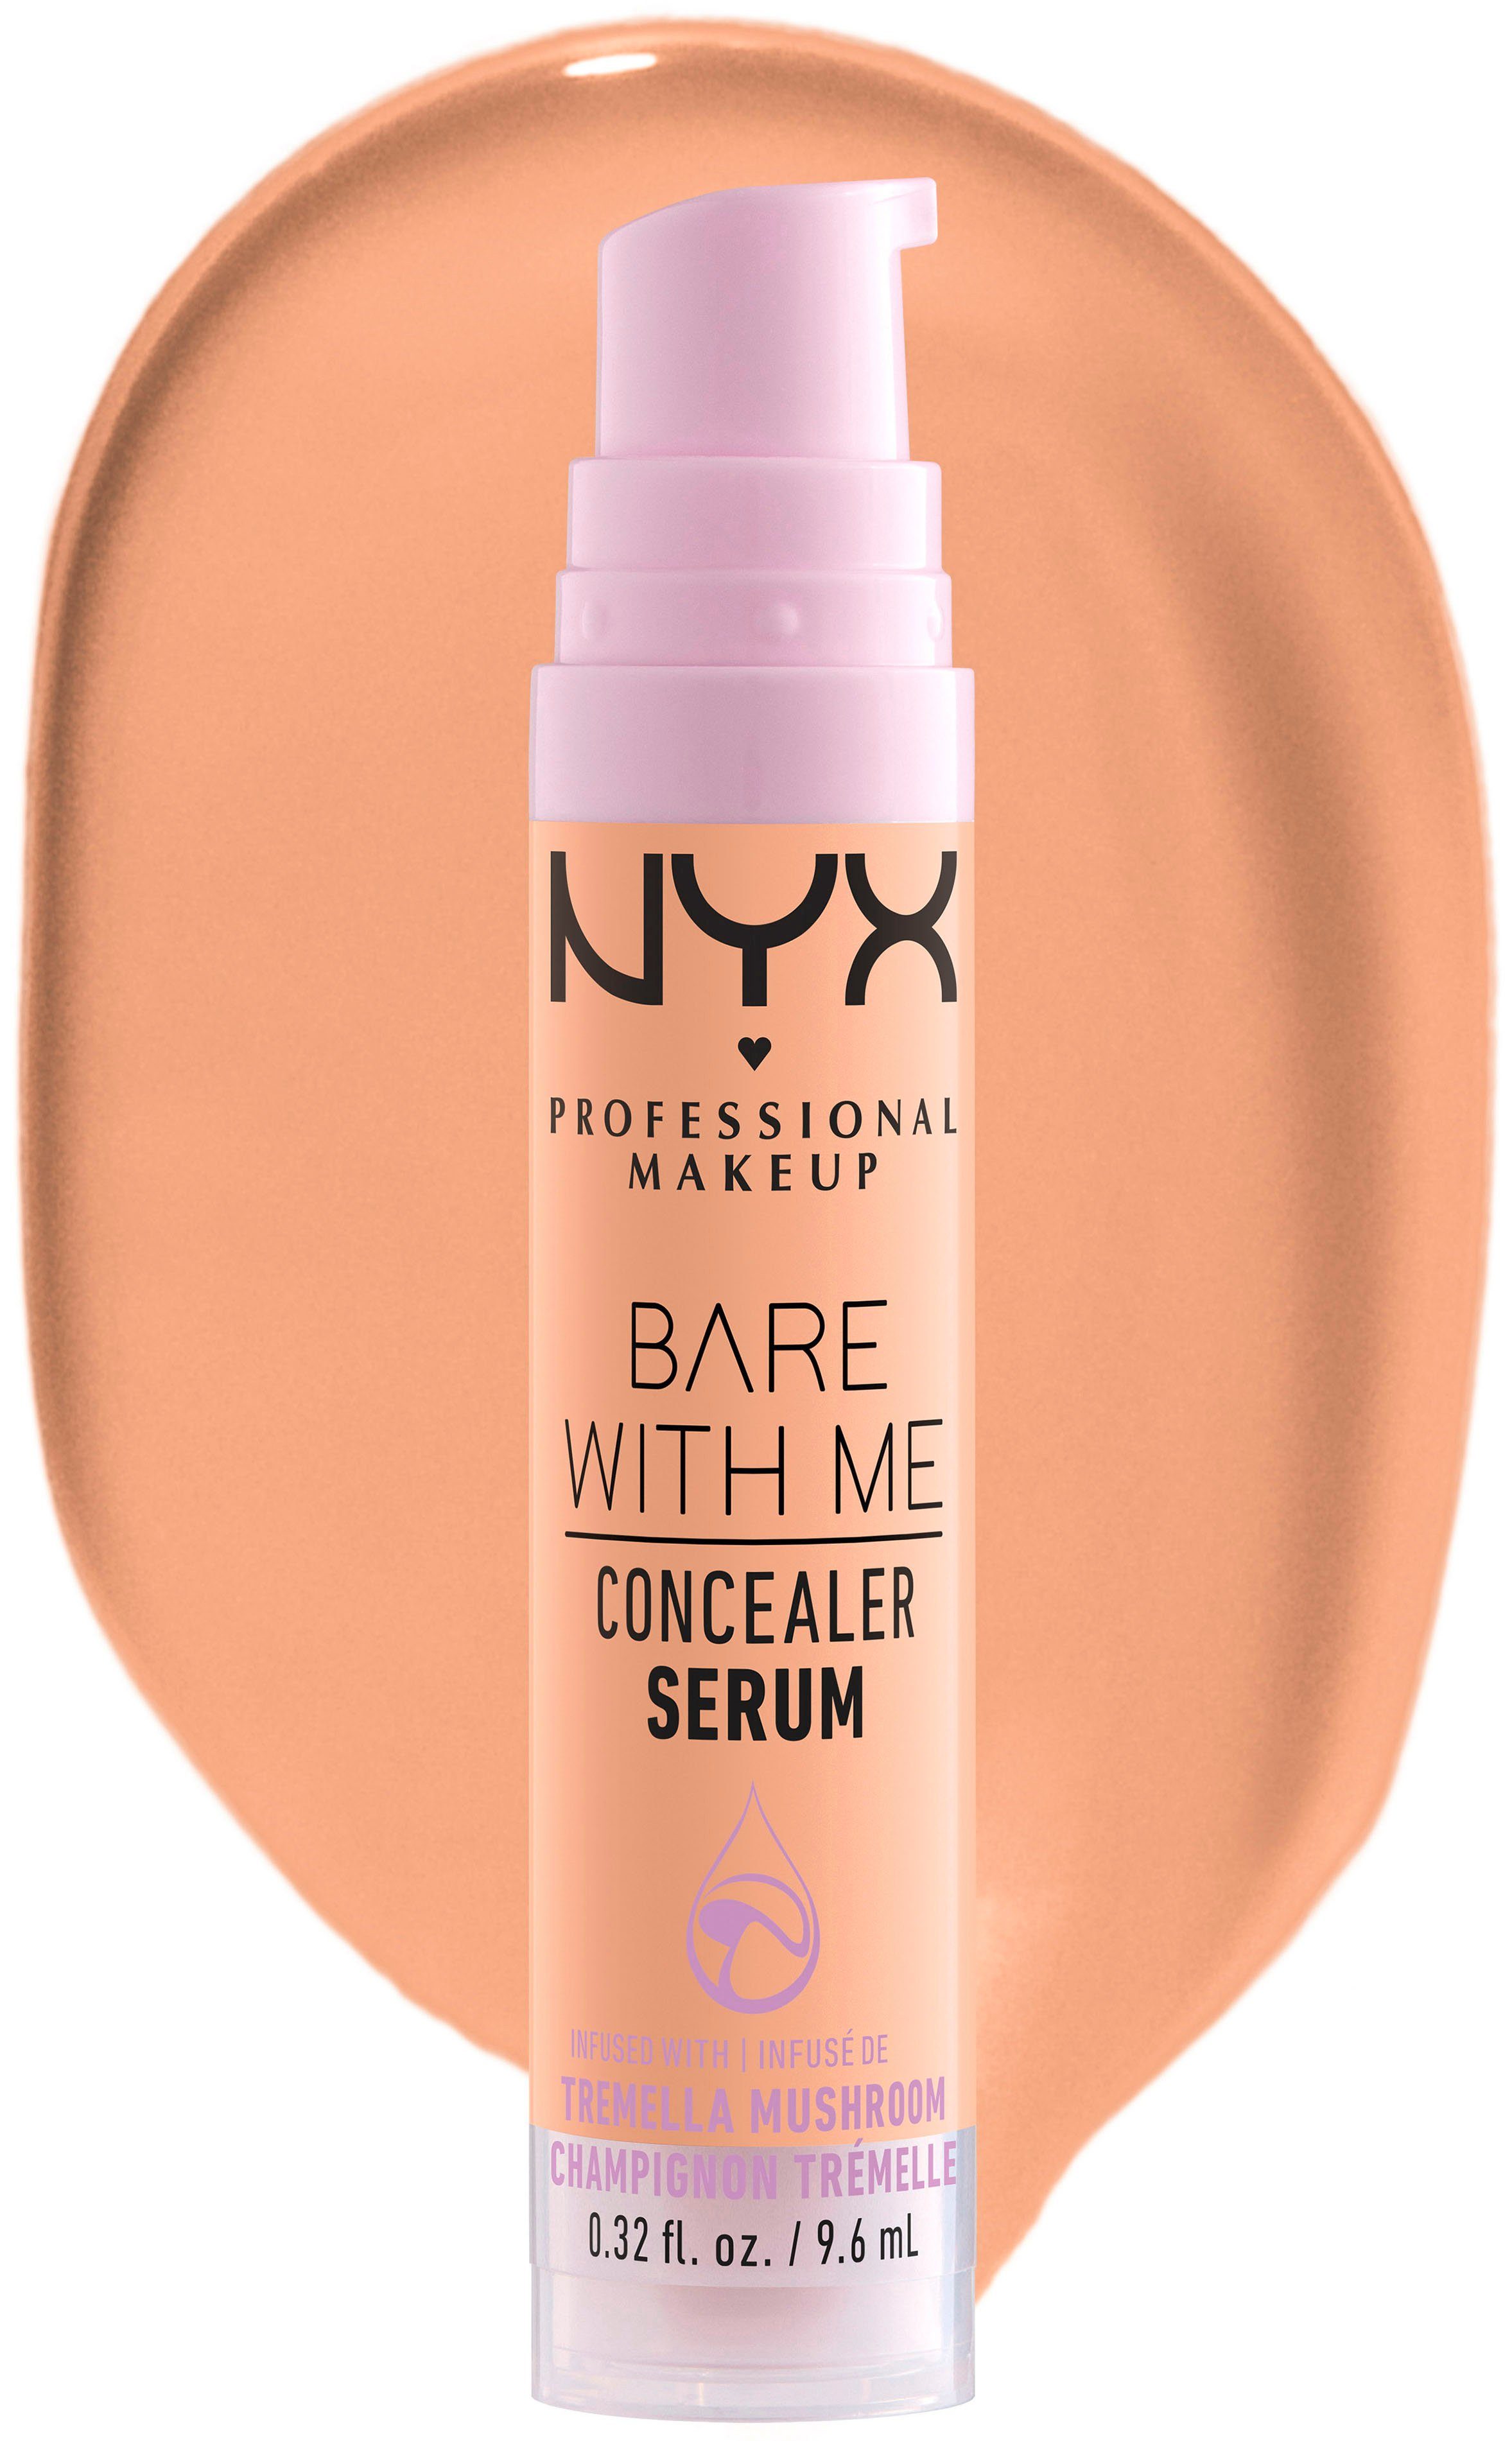 Me Concealer Concealer NYX With Bare Serum